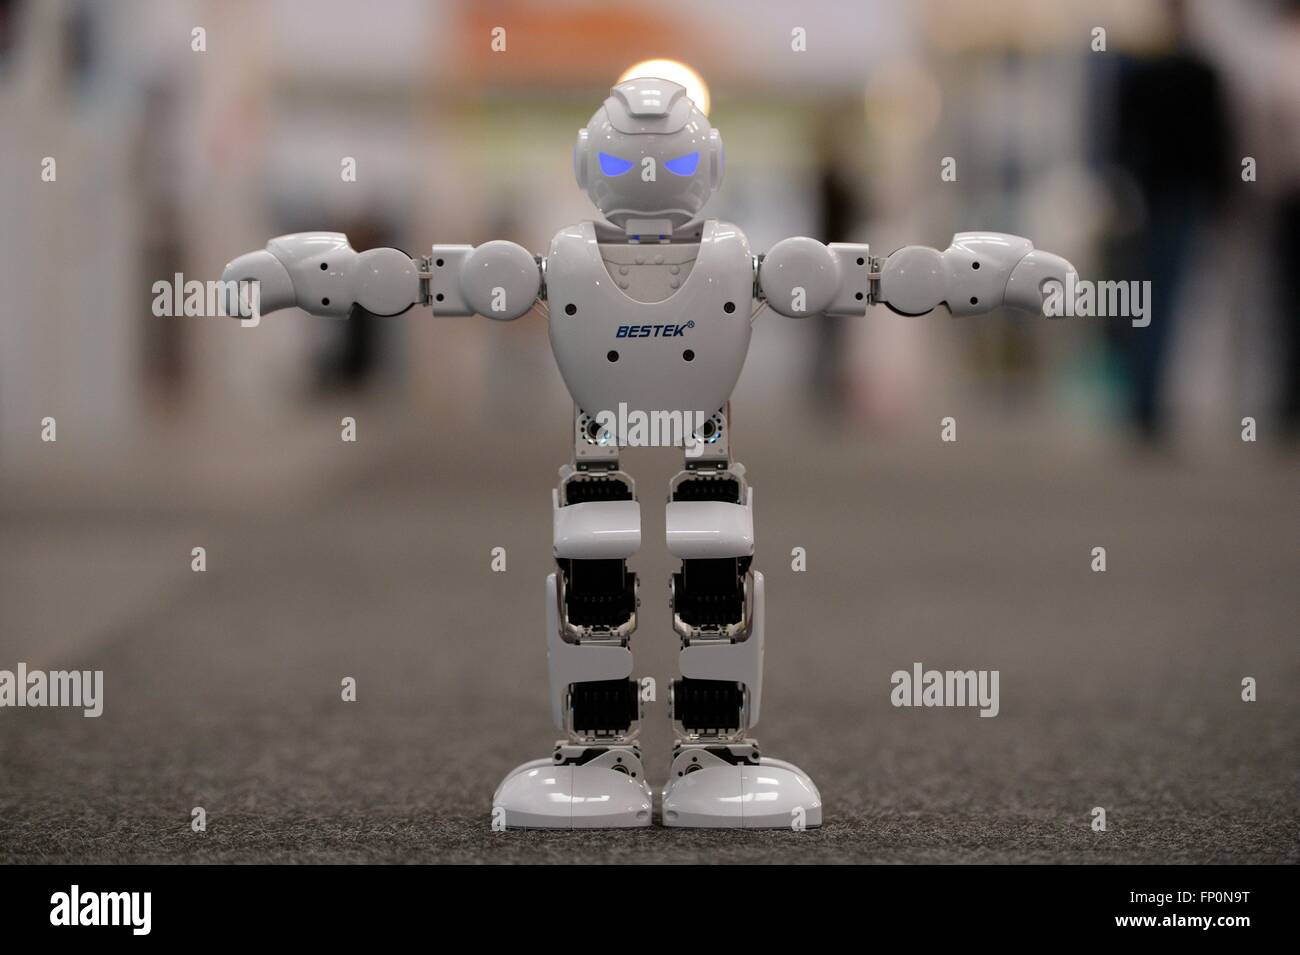 A Robot at the trade fair CeBit, Germany, city of Hannover, 16. March 2016. Photo: Frank May Stock Photo